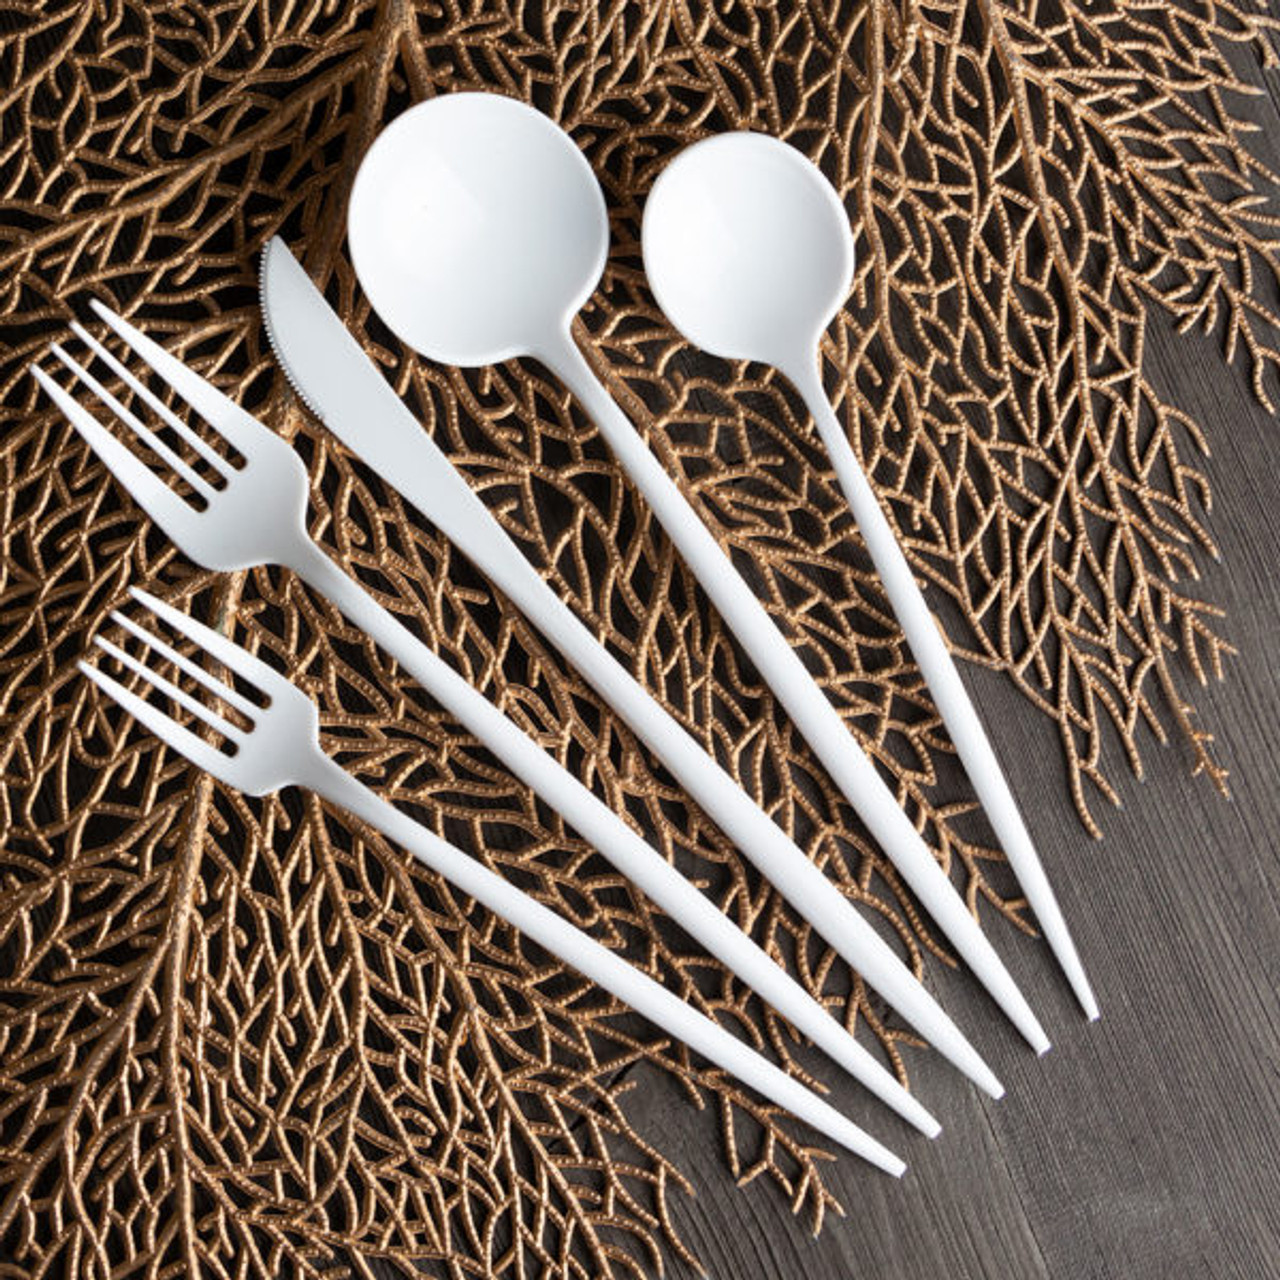 https://cdn11.bigcommerce.com/s-hgqmwywp99/images/stencil/1280x1280/products/51040/45823/novelty-collection-white-looks-like-real-plastic-dinner-forks-32ct-1__55414.1675880424.jpg?c=1?imbypass=on